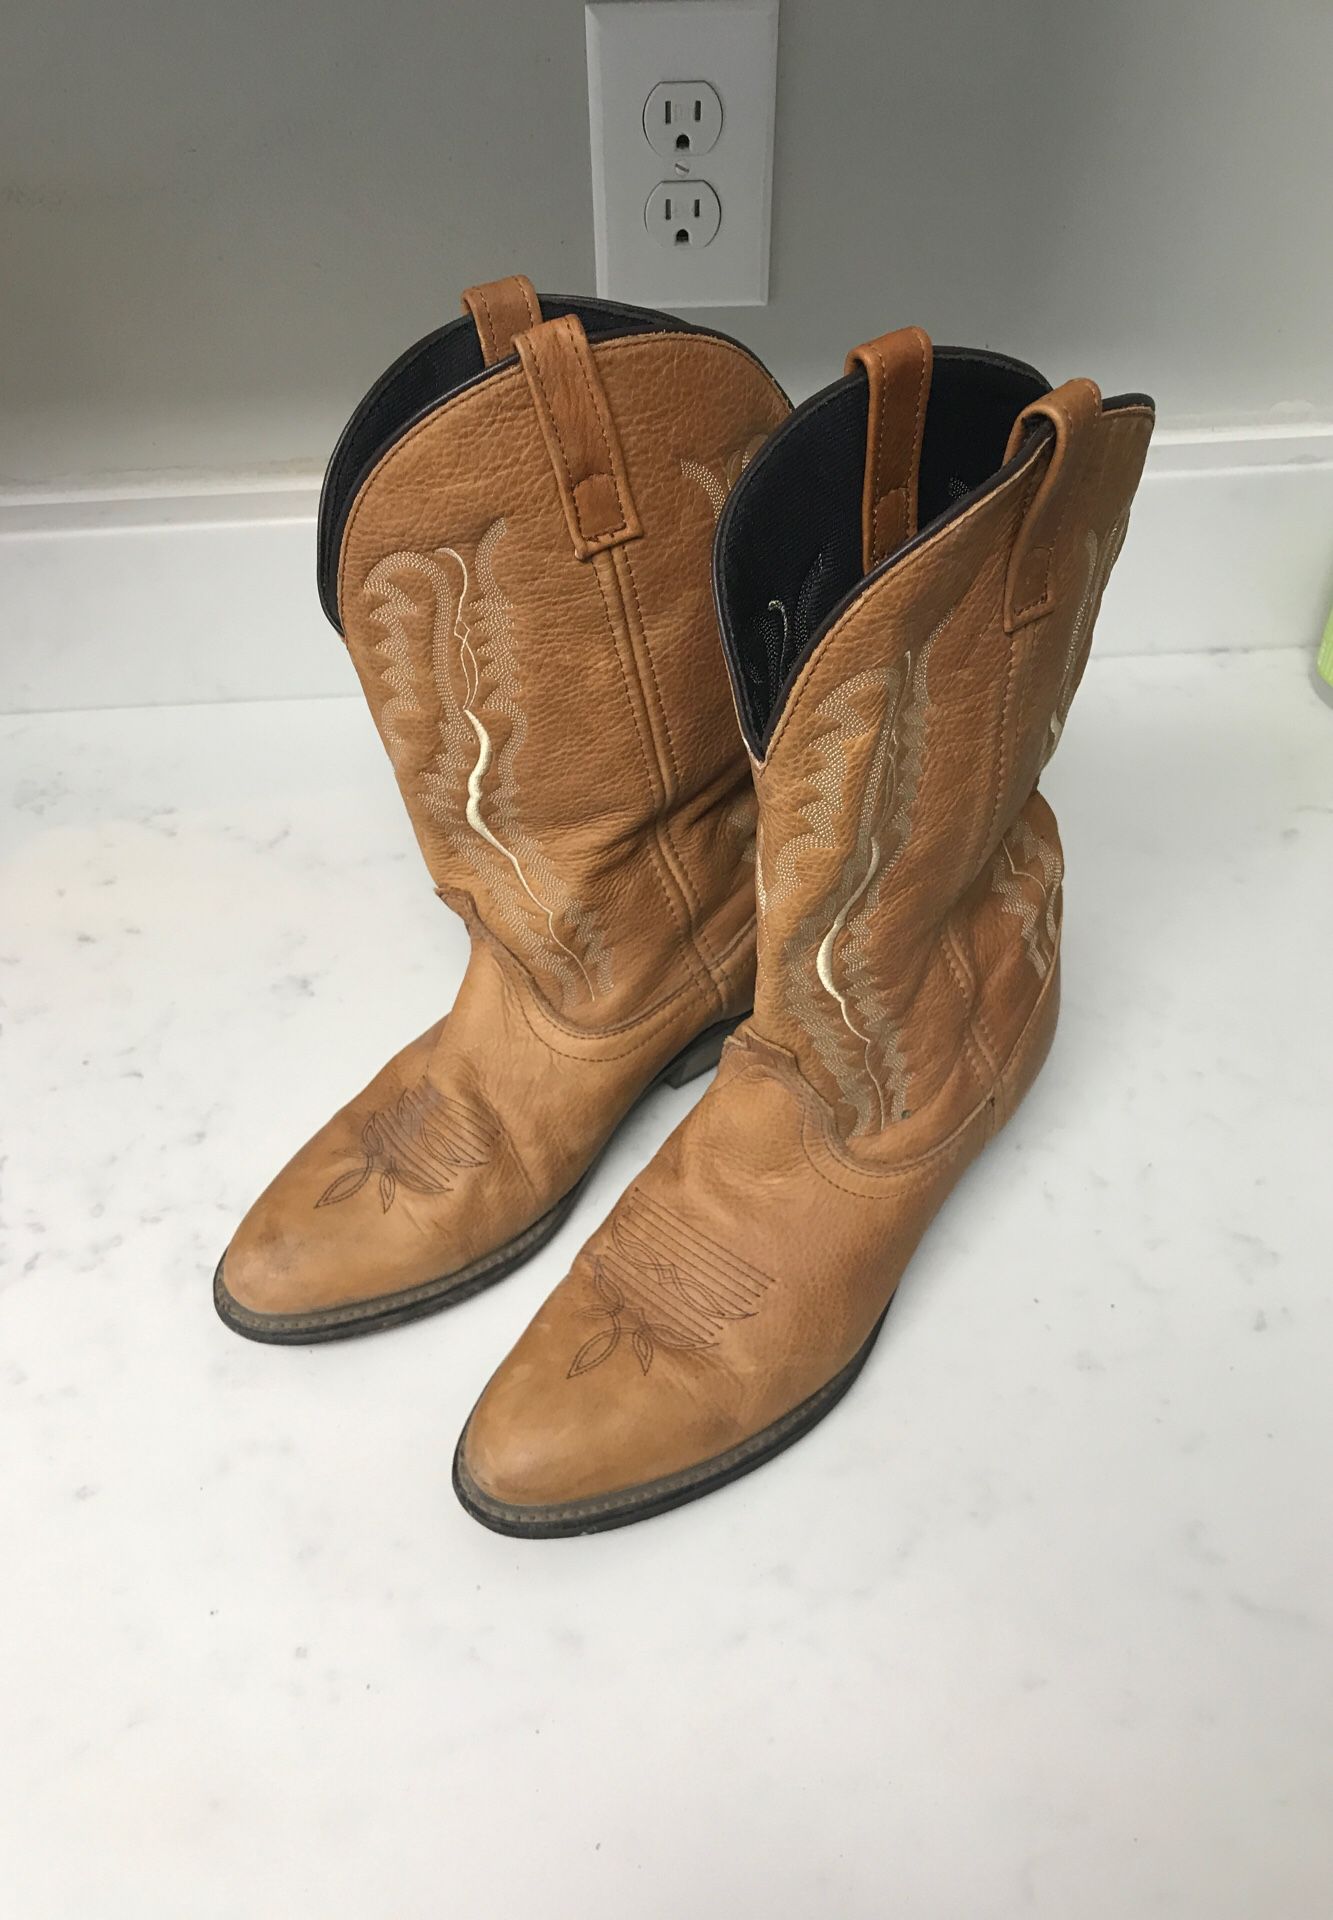 Laredo Abby cowgirl boots - woman’s 10m